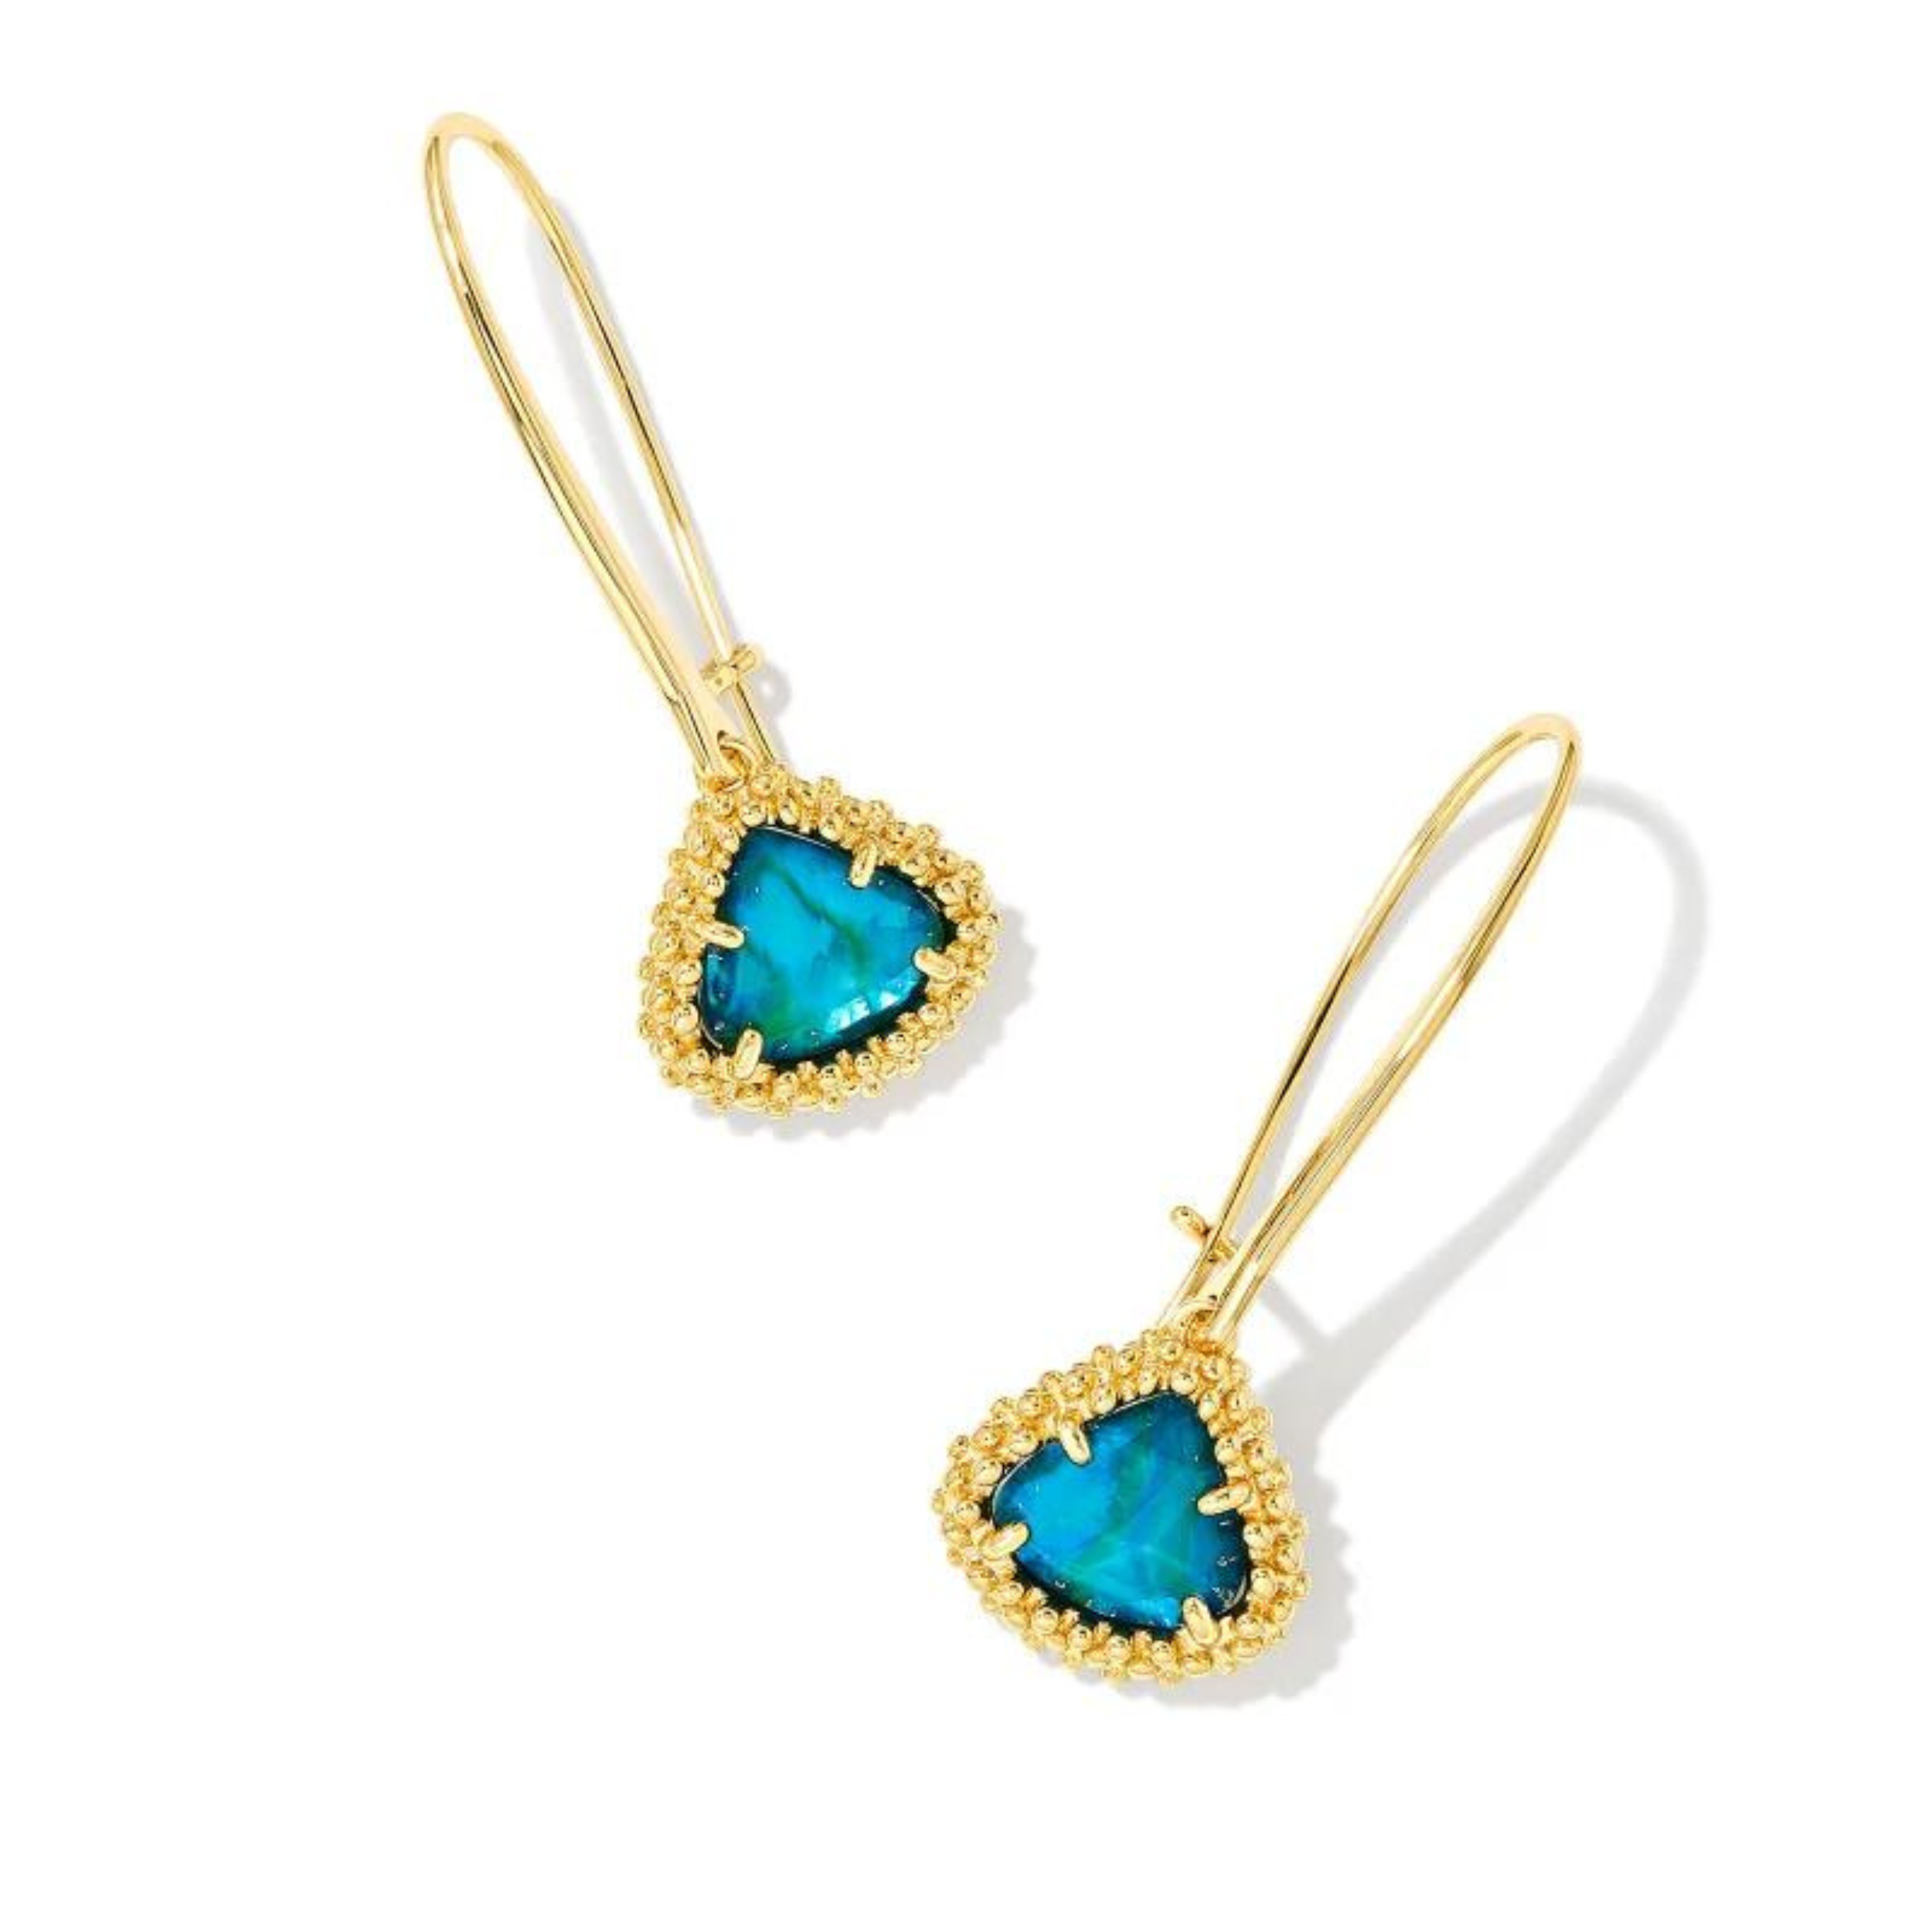 Kendra Scott | Framed Kendall Gold Wire Drop Earrings in Teal Abalone. Pictured on a white background.